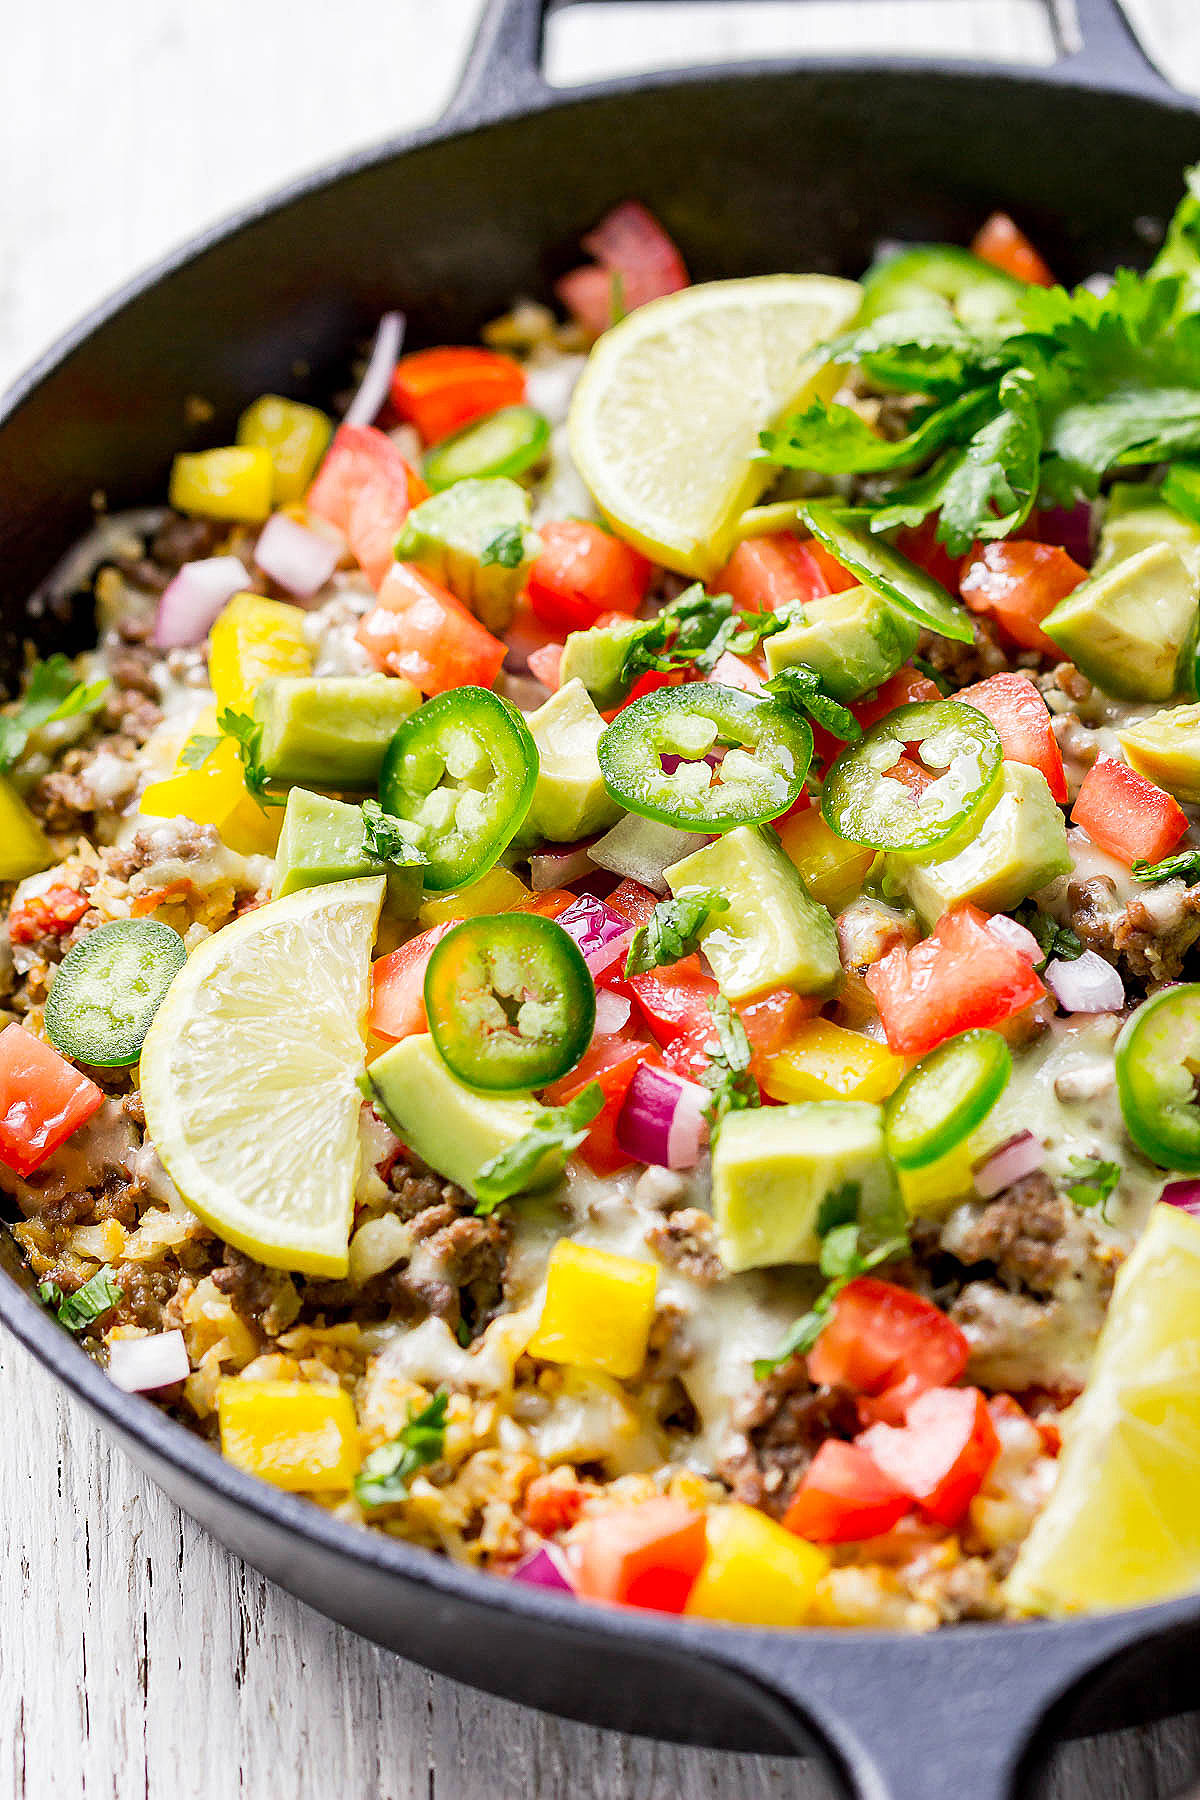 Keto Burrito Bowl Recipe with Beef and Cauliflower Rice – How to Make a ...